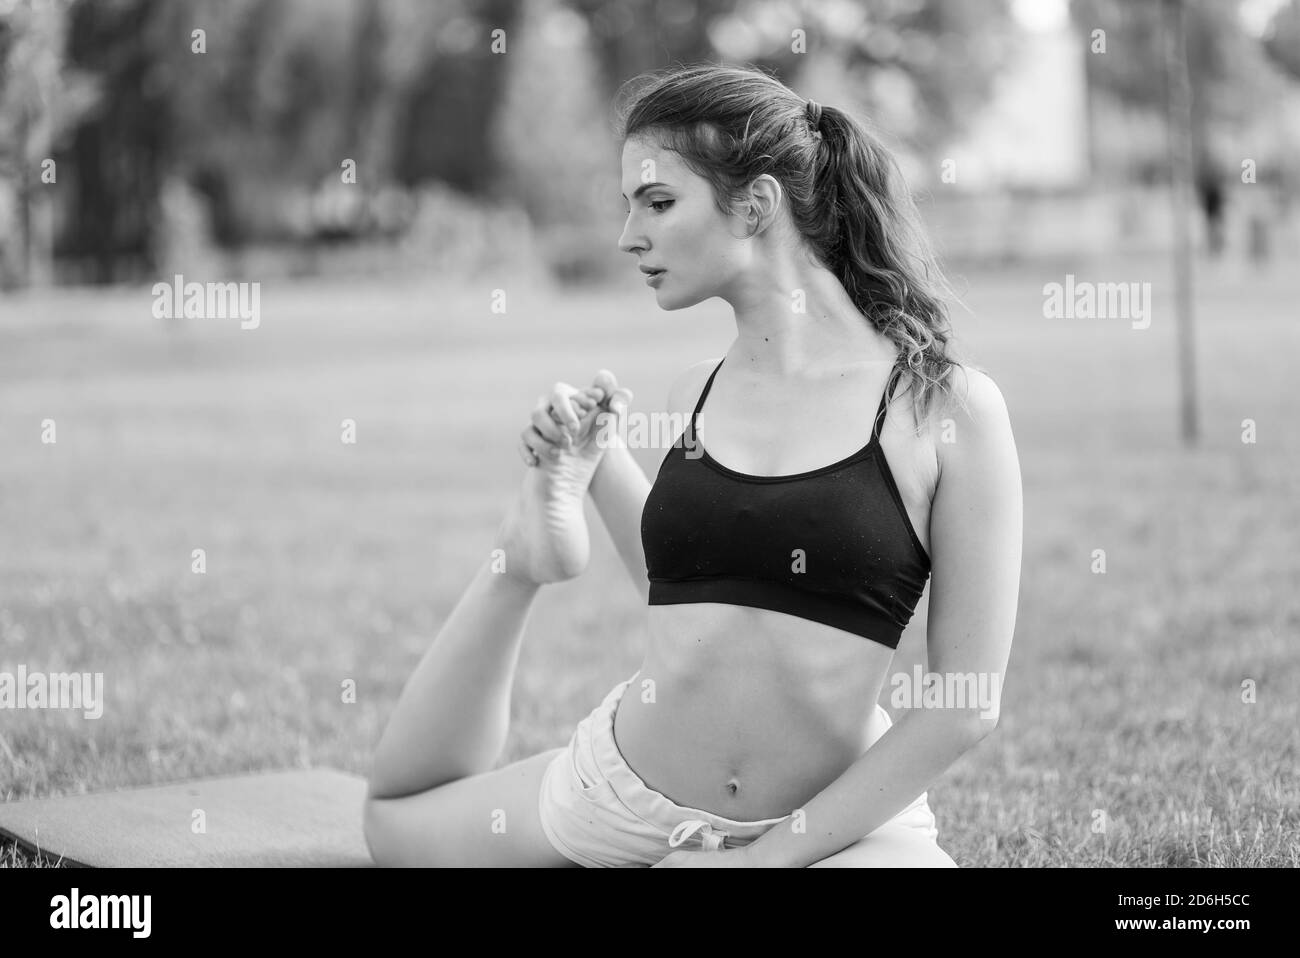 Girl doing yoga in the park during the day. Black and white photo. BW Stock Photo